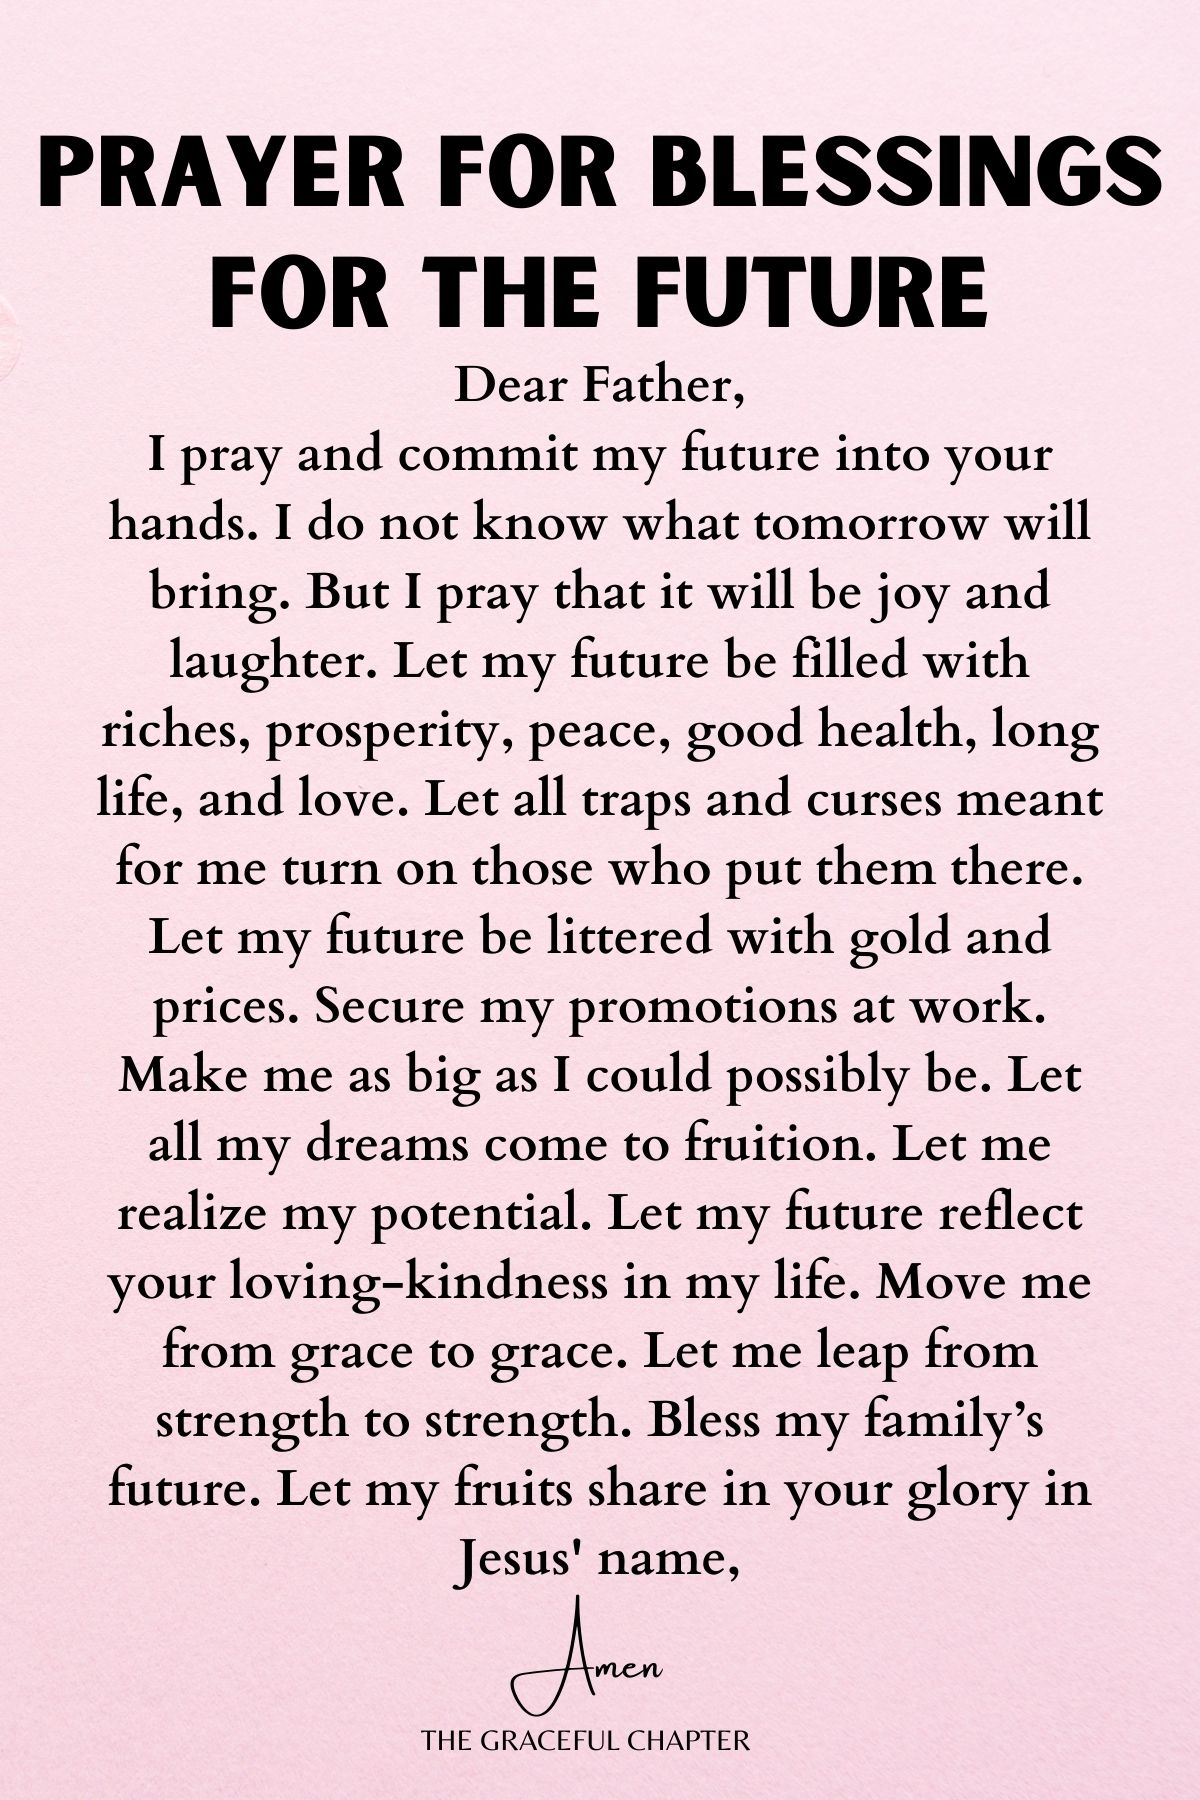 Prayer for blessings for your future